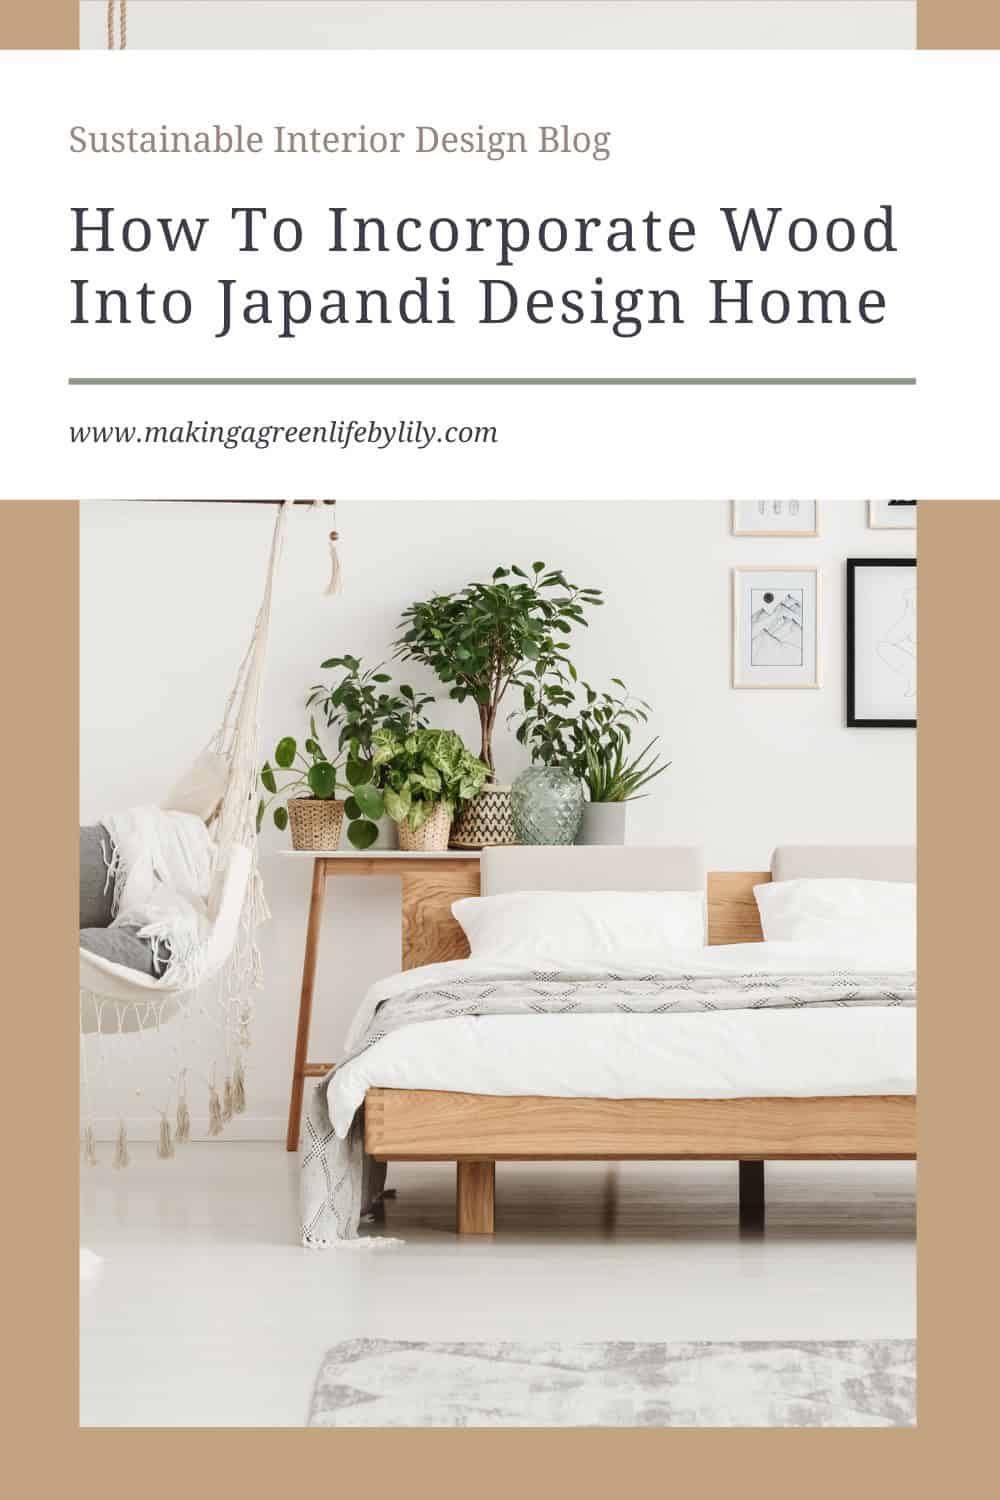 How To Incorporate Wood Into Japandi Design Home Pin